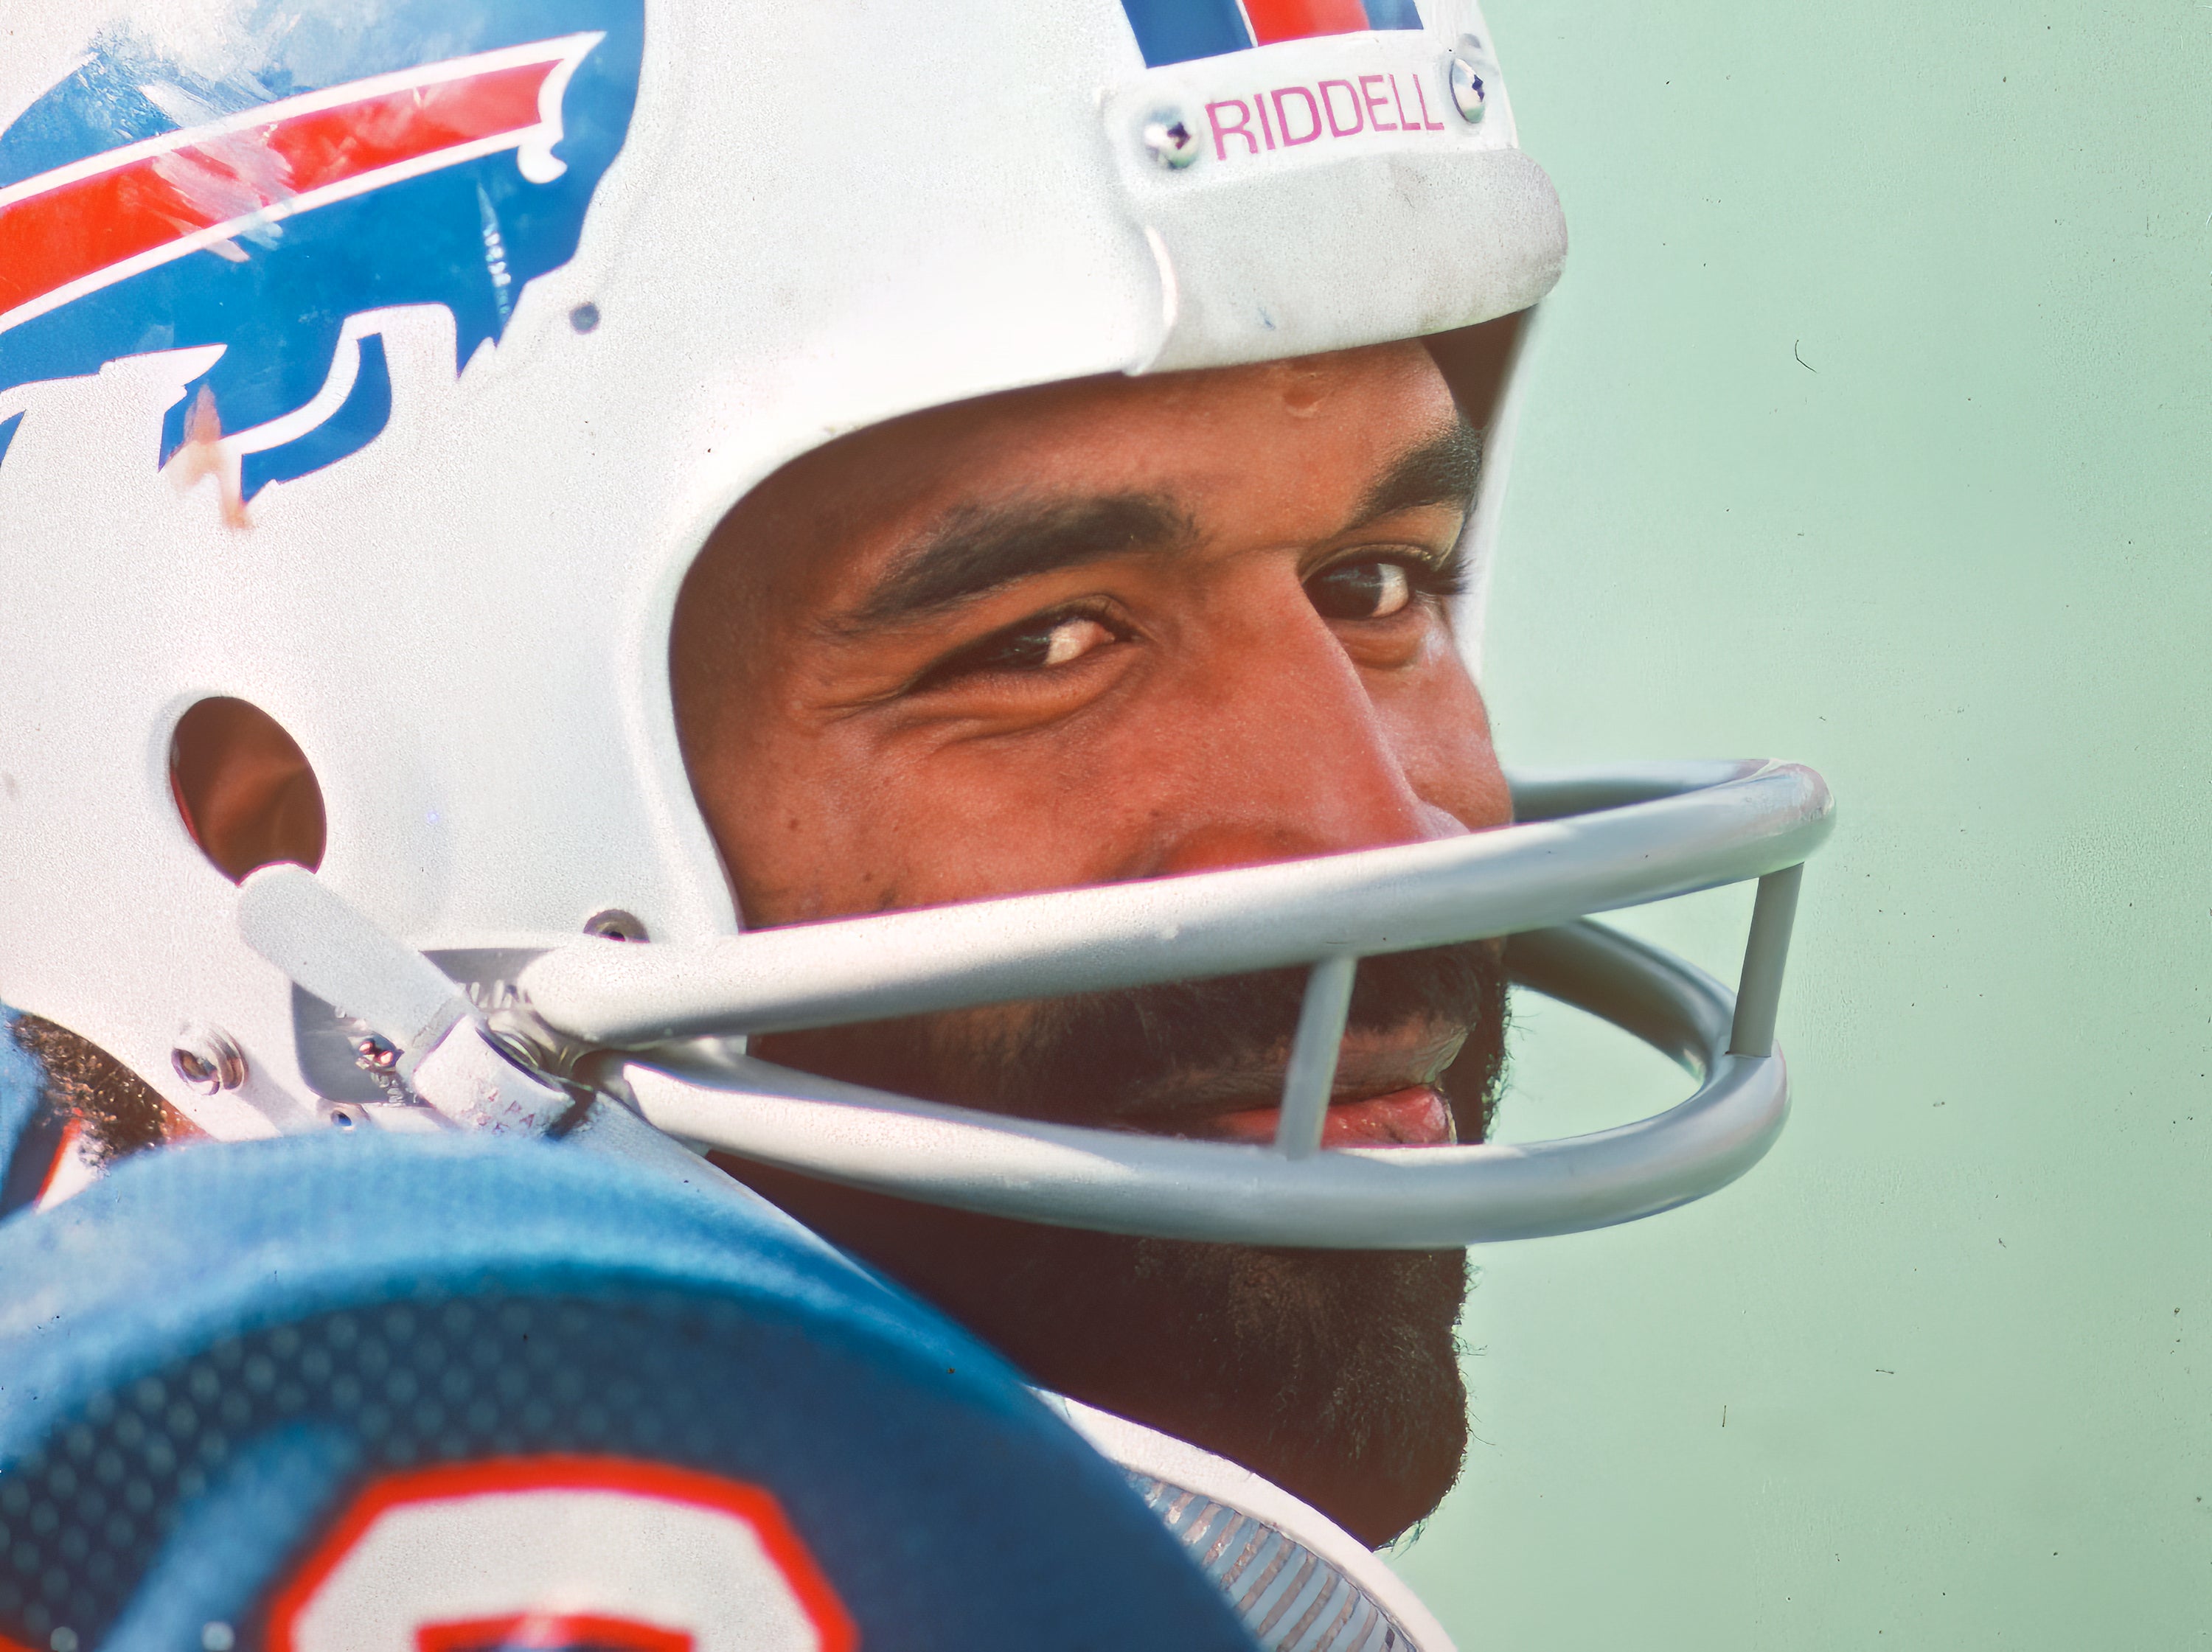 Running back O.J. Simpson of the Buffalo Bills looks on from the sideline during a game against the Denver Broncos at Rich Stadium on October 5, 1975 in Orchard Park, New York